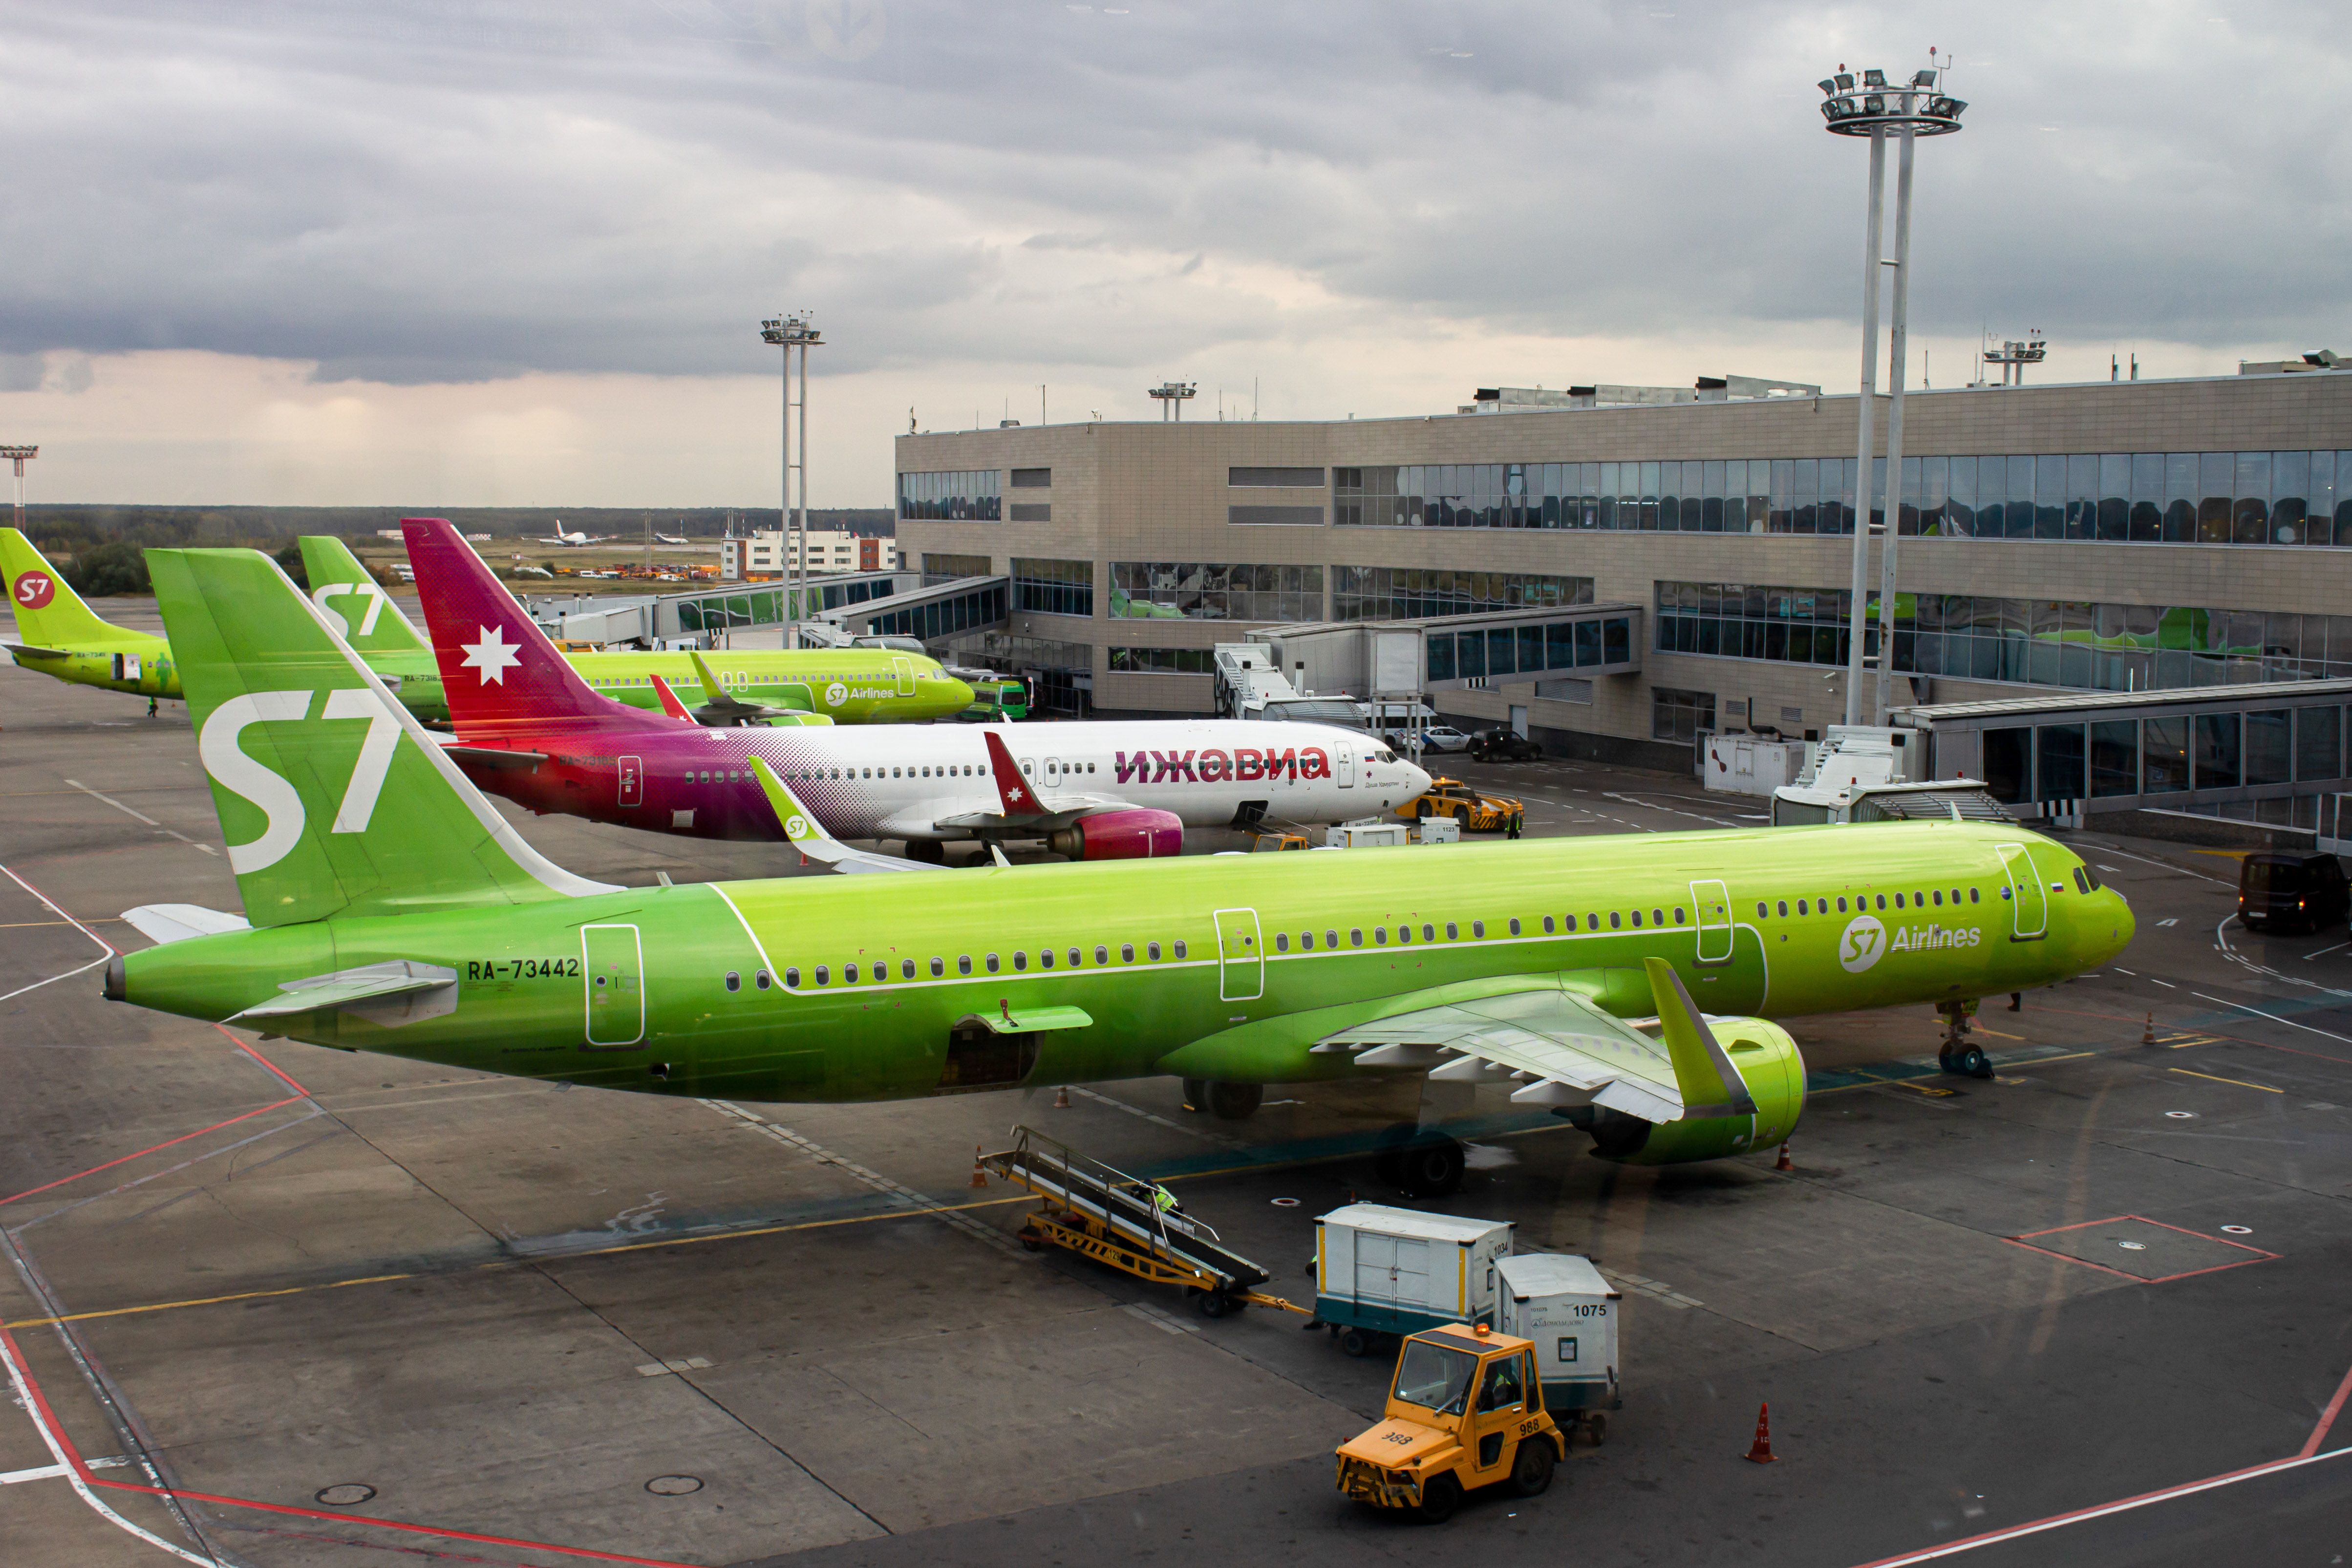 Aircraft from S7 Airlines and Izhavia Airlines are seen at the Domodedovo airport in Moscow.